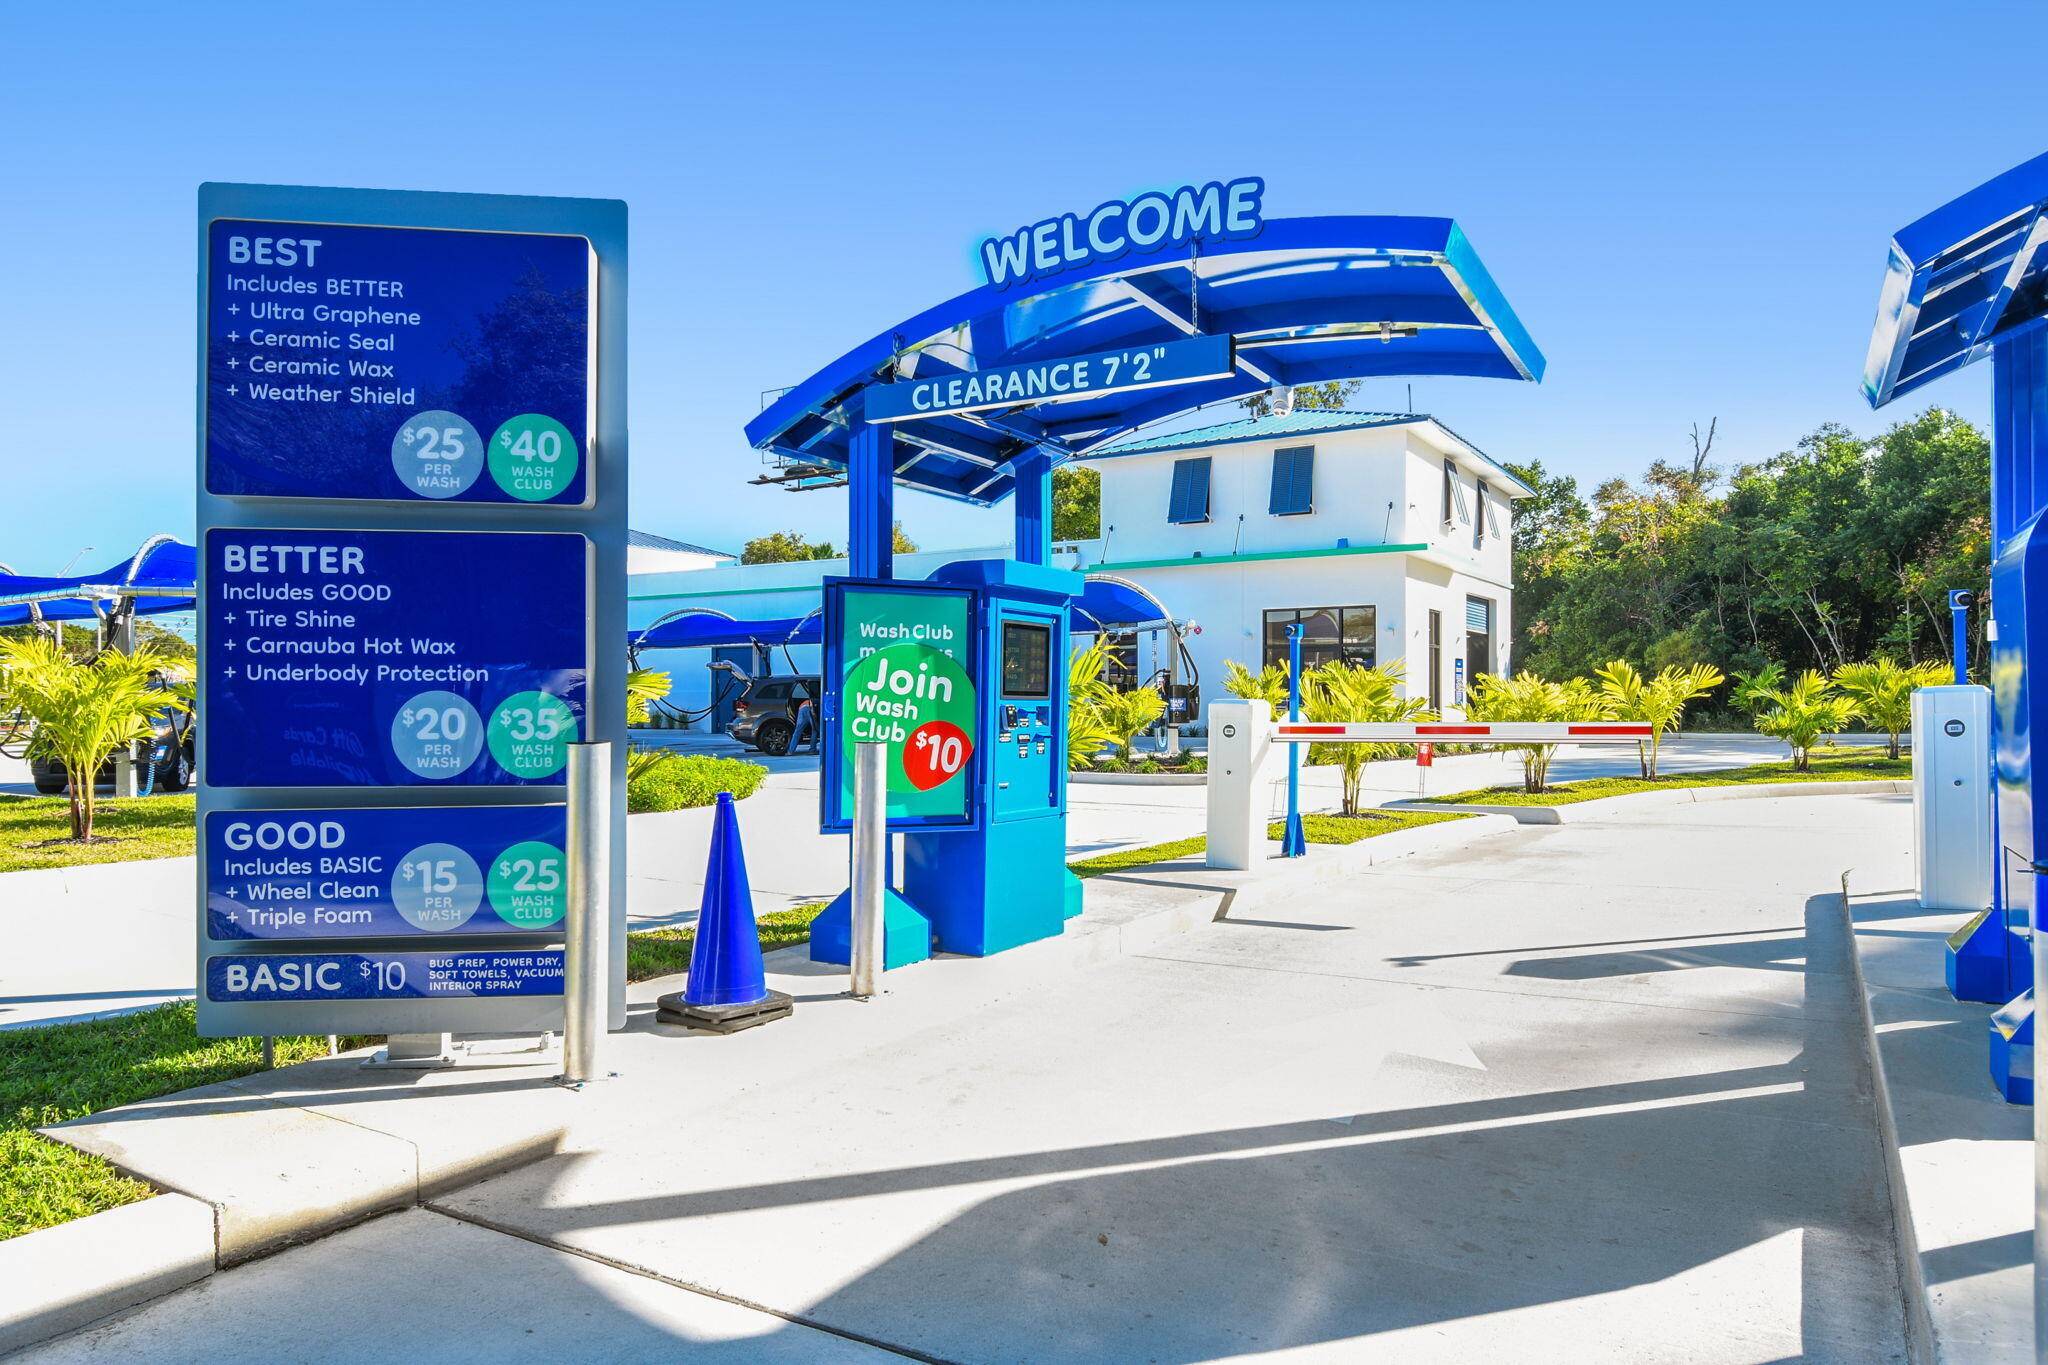 Discover the epitome of modern car care with this brand new express car wash facility located at 35952 US Hwy 19 N, Palm Harbor, FL 34684.